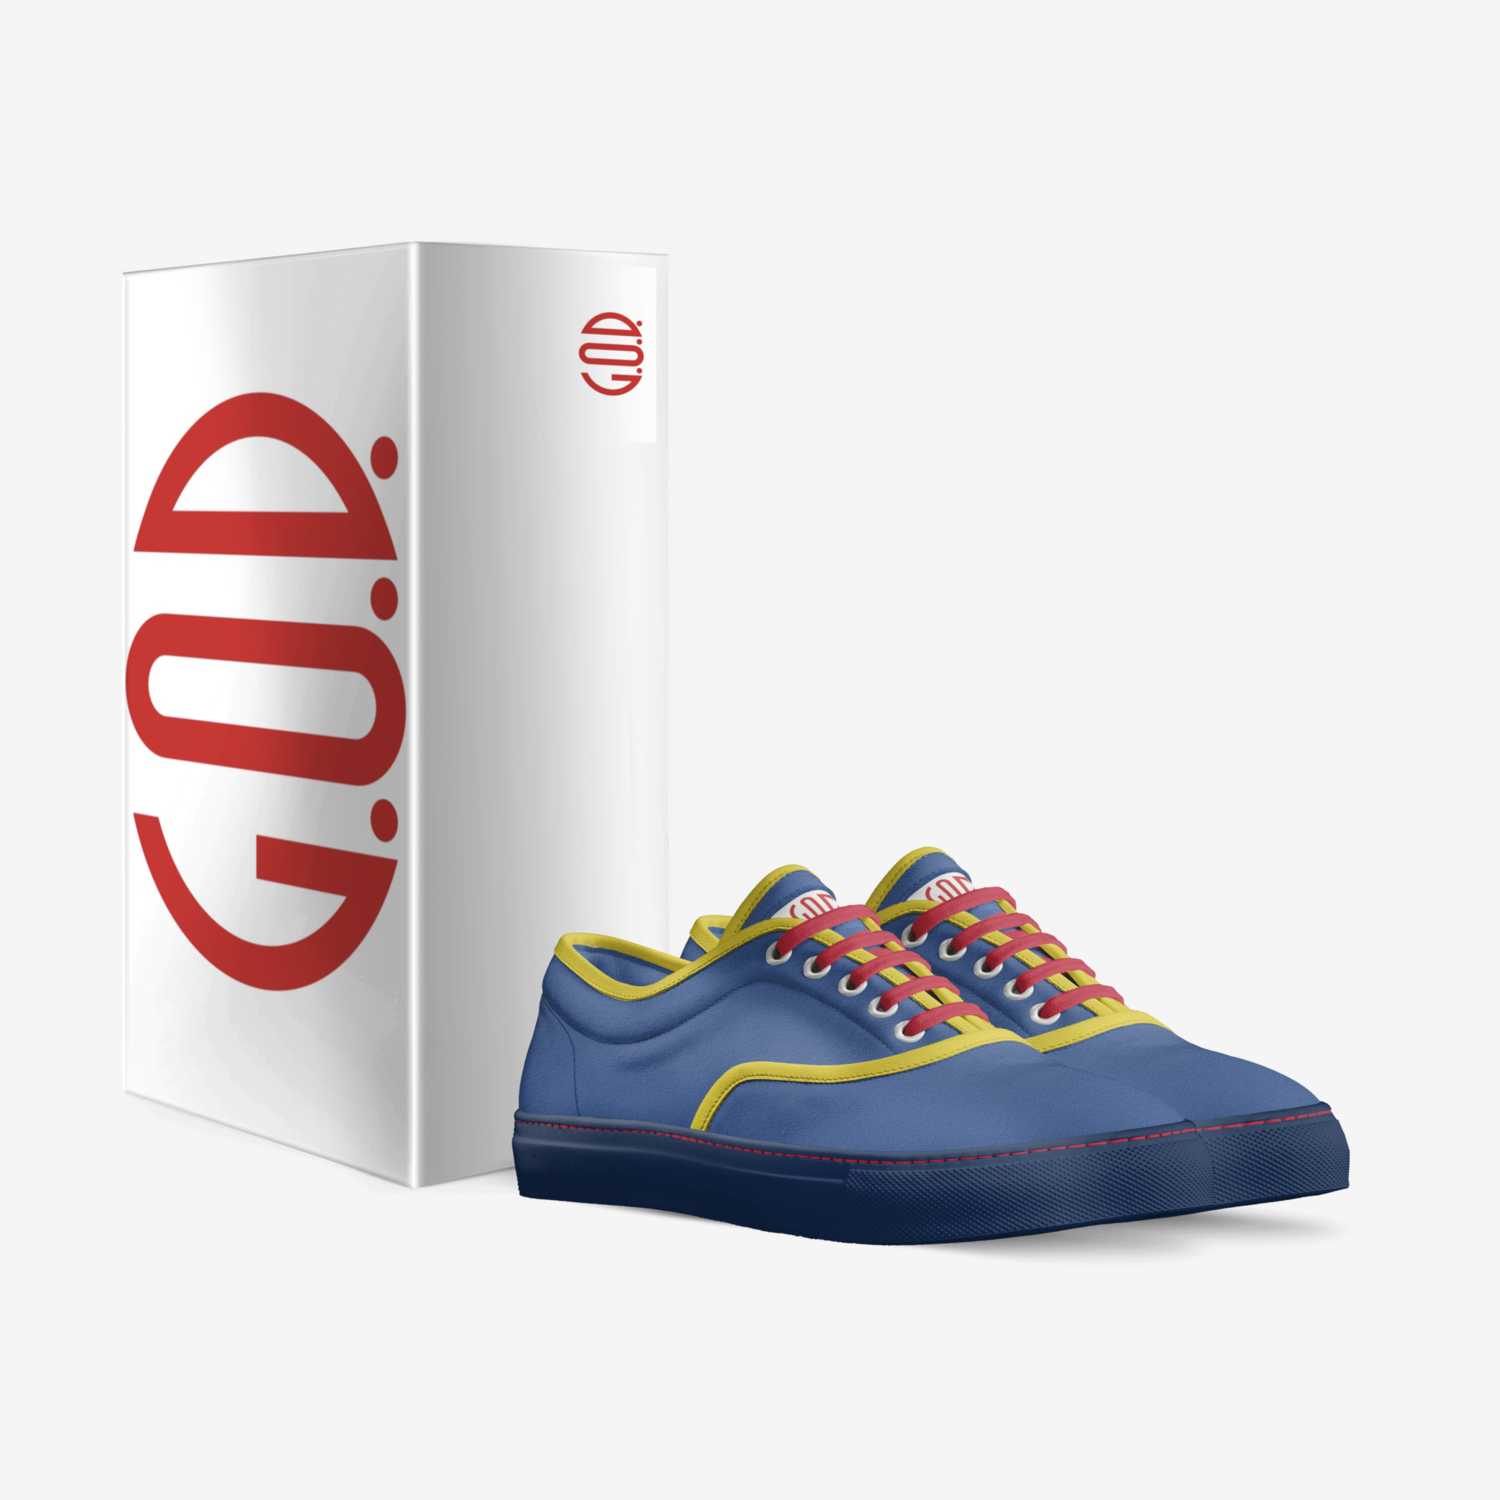 G.O.D. Stockholm  custom made in Italy shoes by G.O.D. | Box view